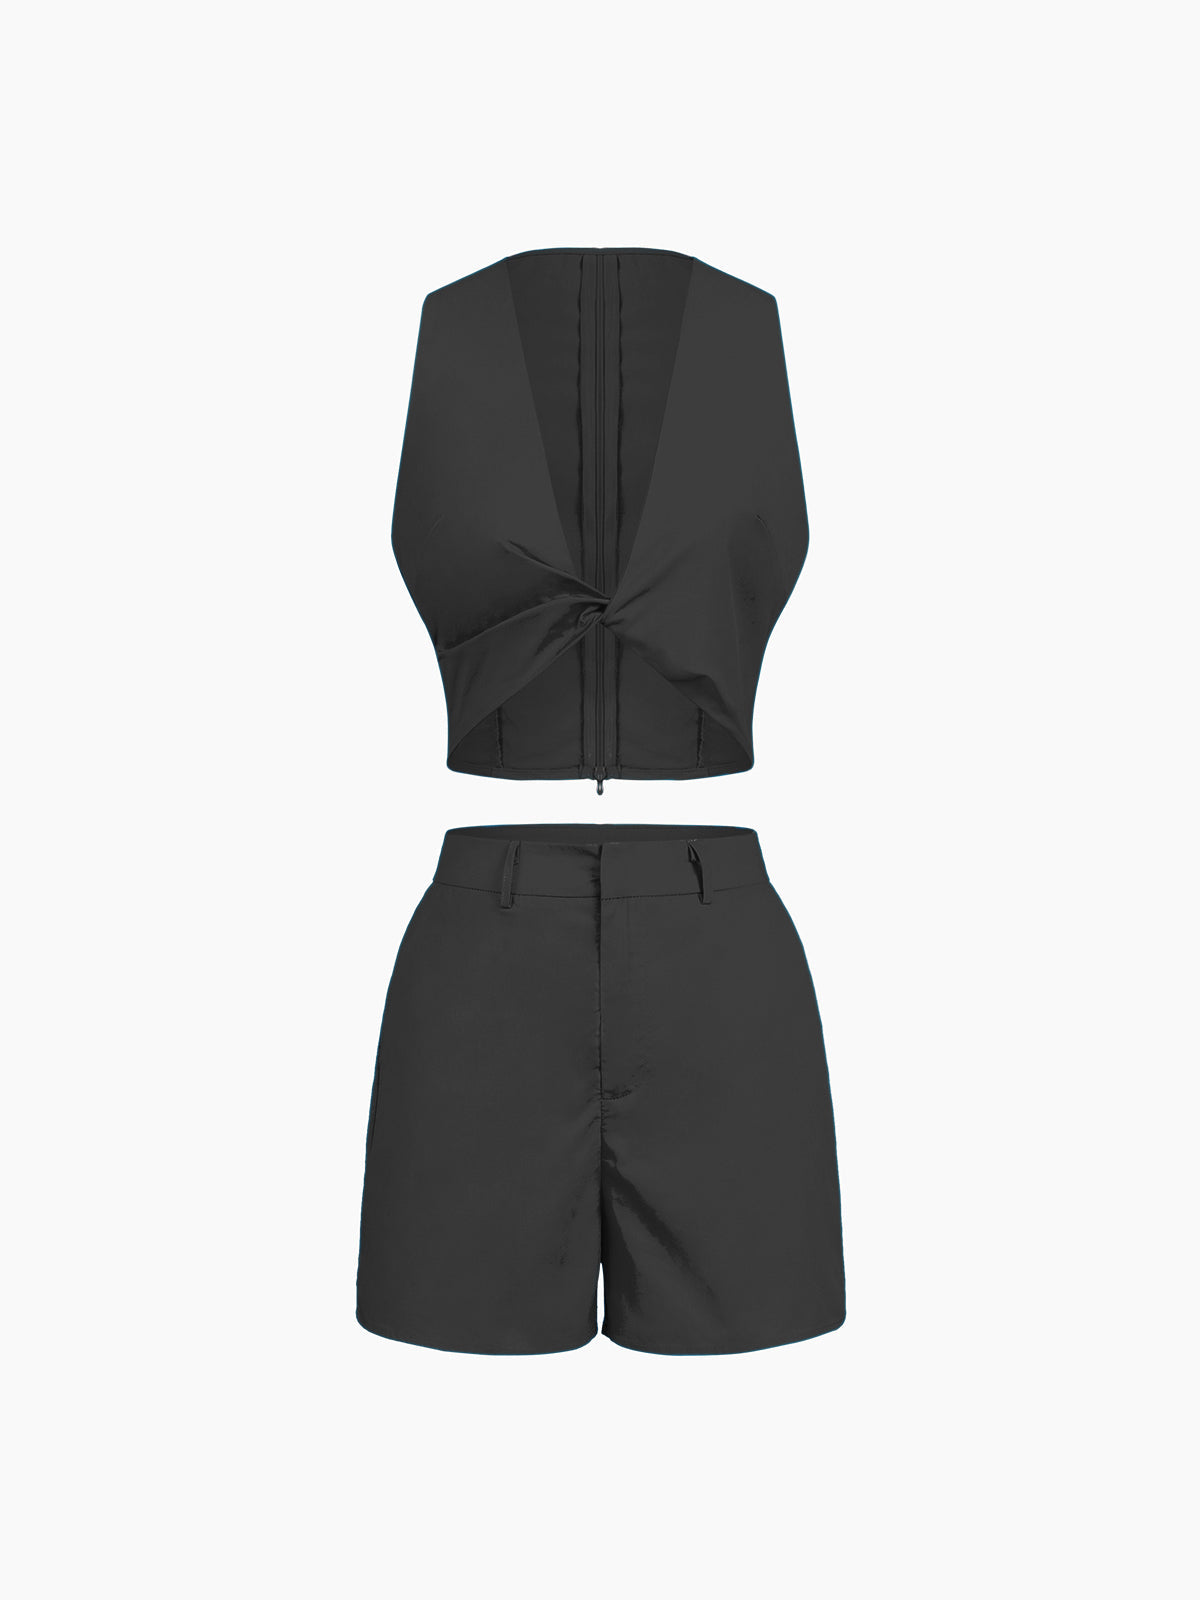 Sicilia Knotted Two Piece Shorts Set